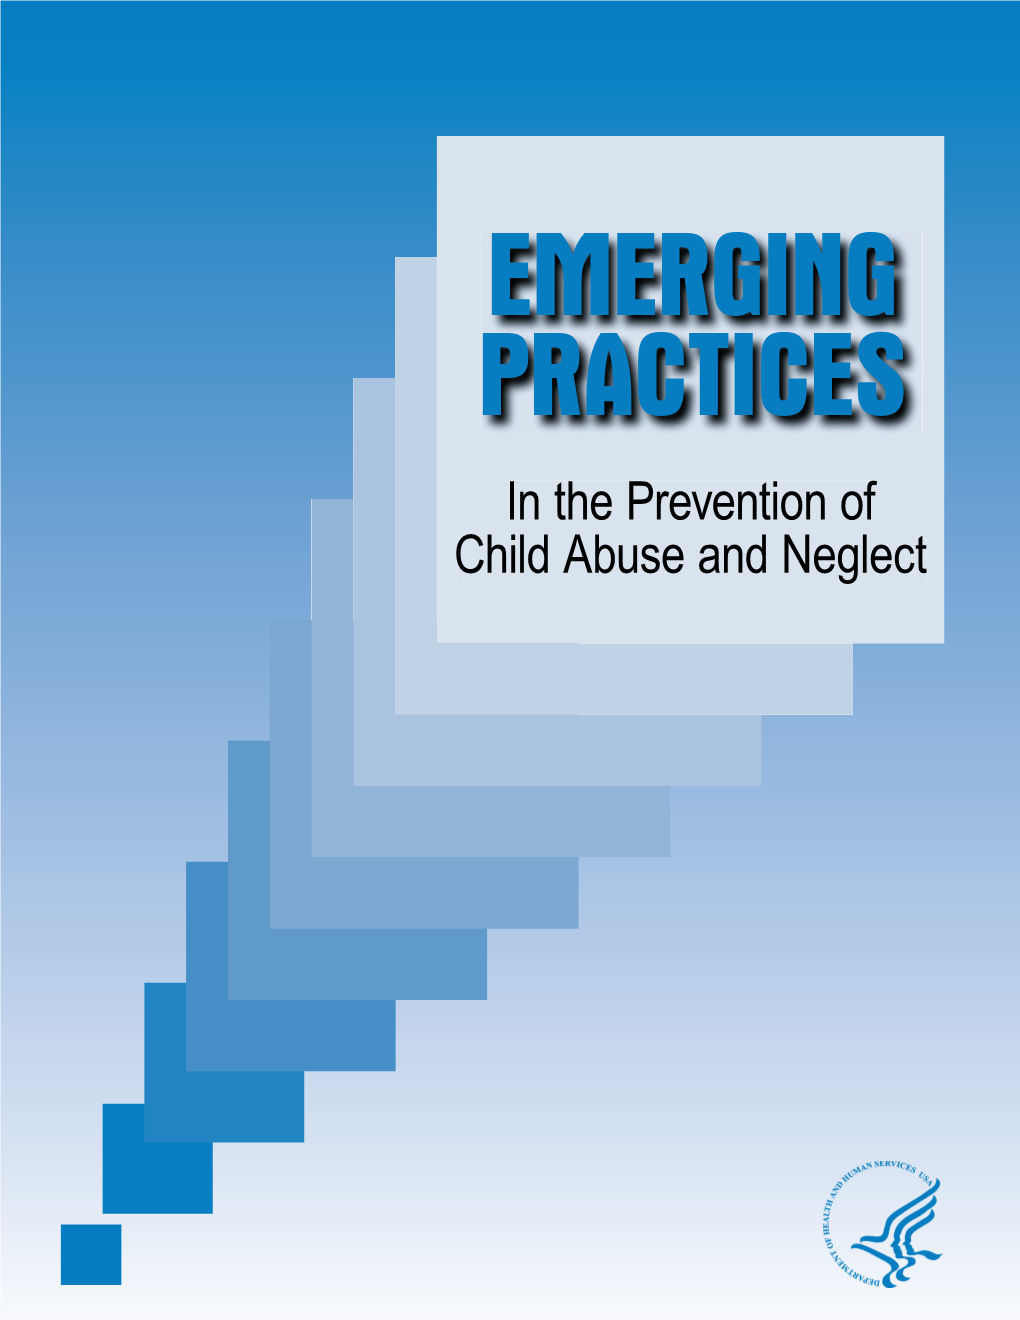 EMERGING PRACTICES in the Prevention of Child Abuse and Neglect